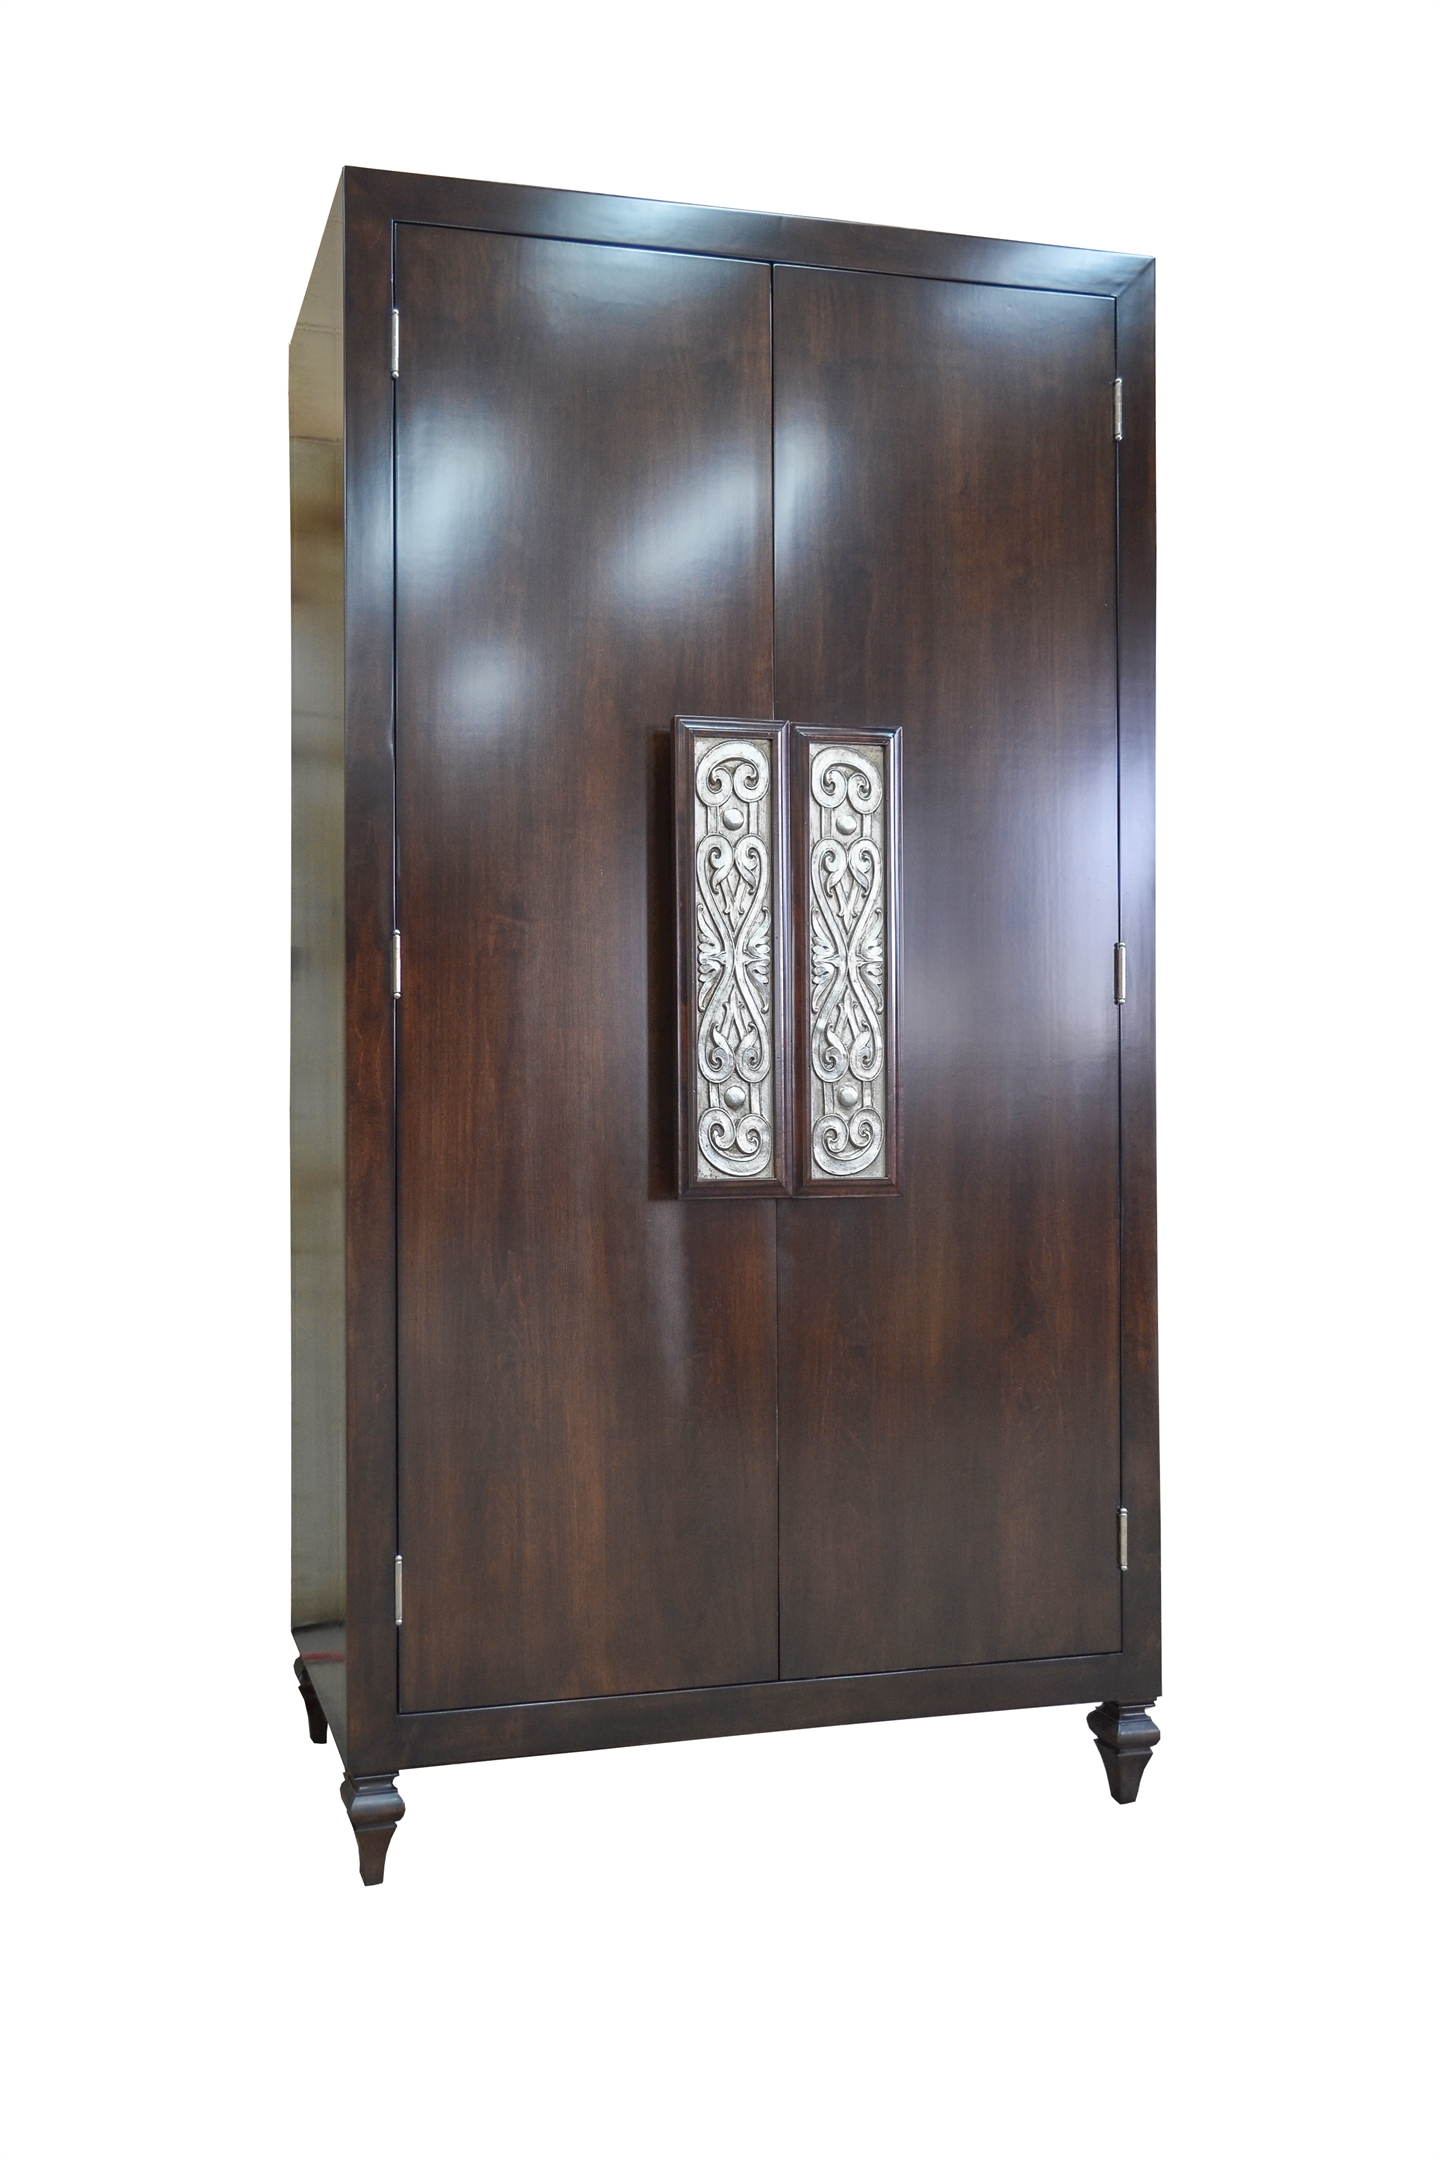 Custom Maple Cabinet With Silver Leaf Door Pulls